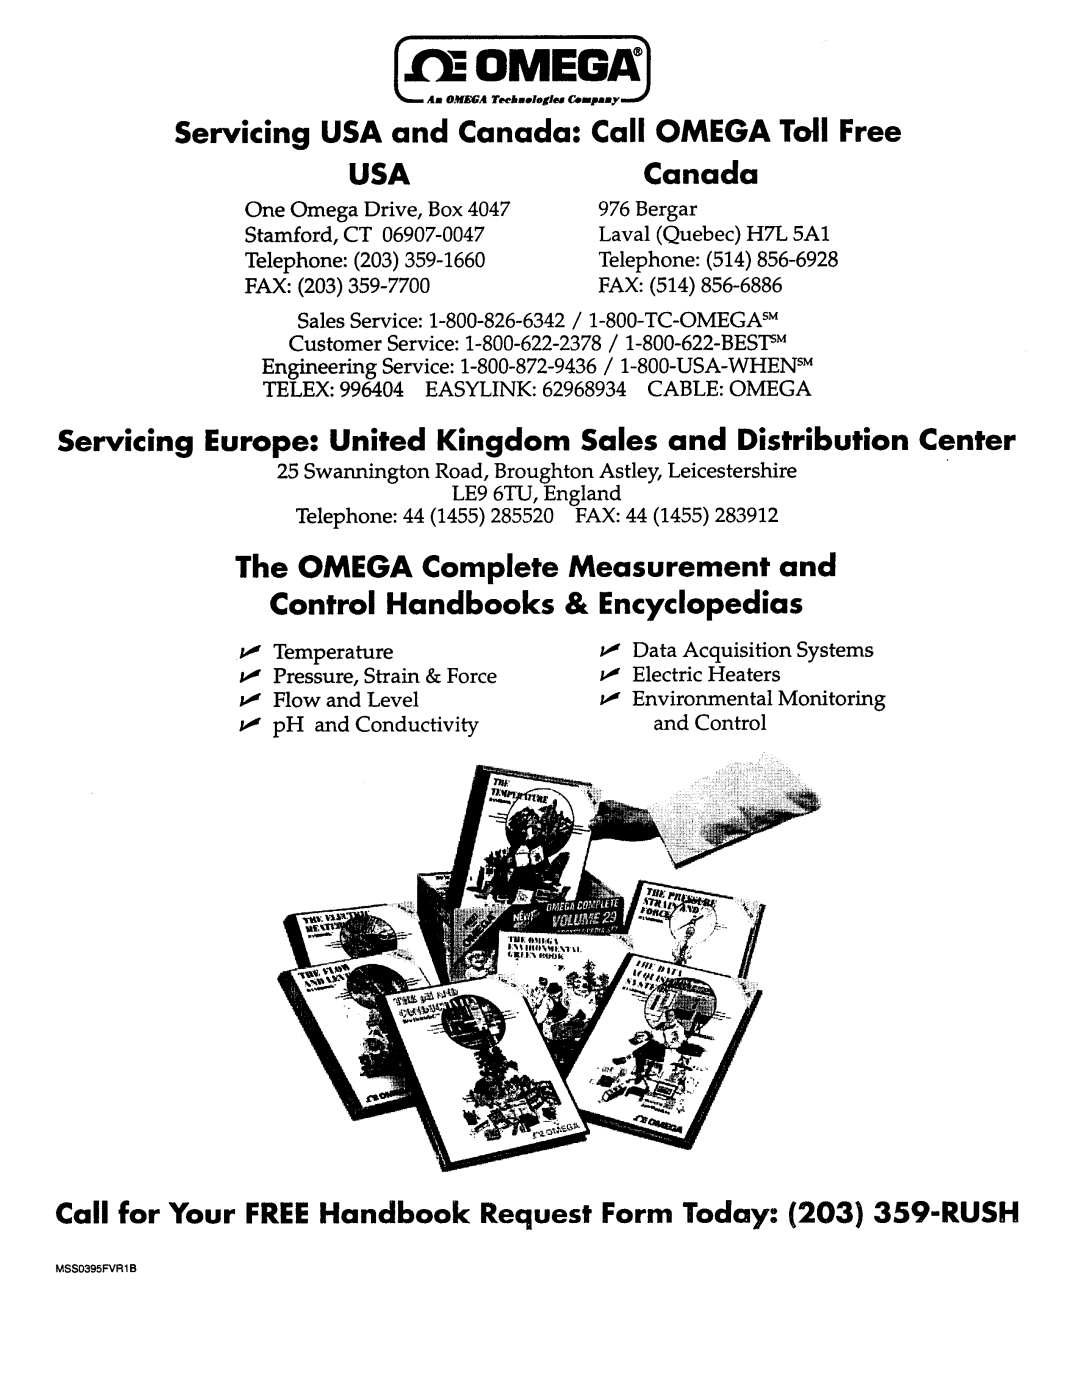 Omega RG-2501 manual Servicing USA and Canada: Call OMEGA Toll Free, The OMEGA Complete Measurement and 